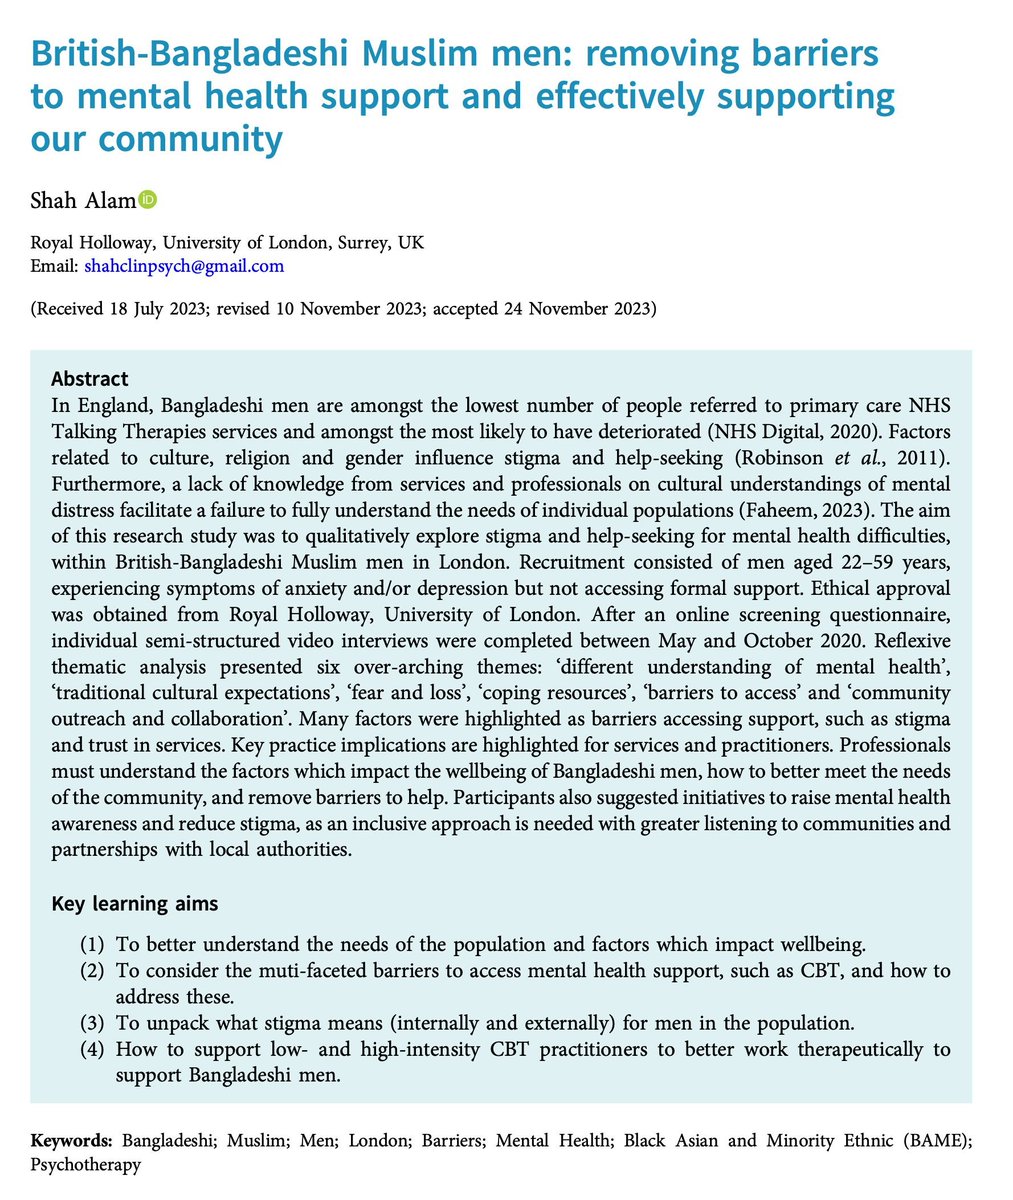 Alhamdulilah my doctoral research has been published sharing the voices of British-Bangladeshi Muslim men, highlighting factors that impact mental health and barriers to support. Free open access link: cambridge.org/core/journals/…